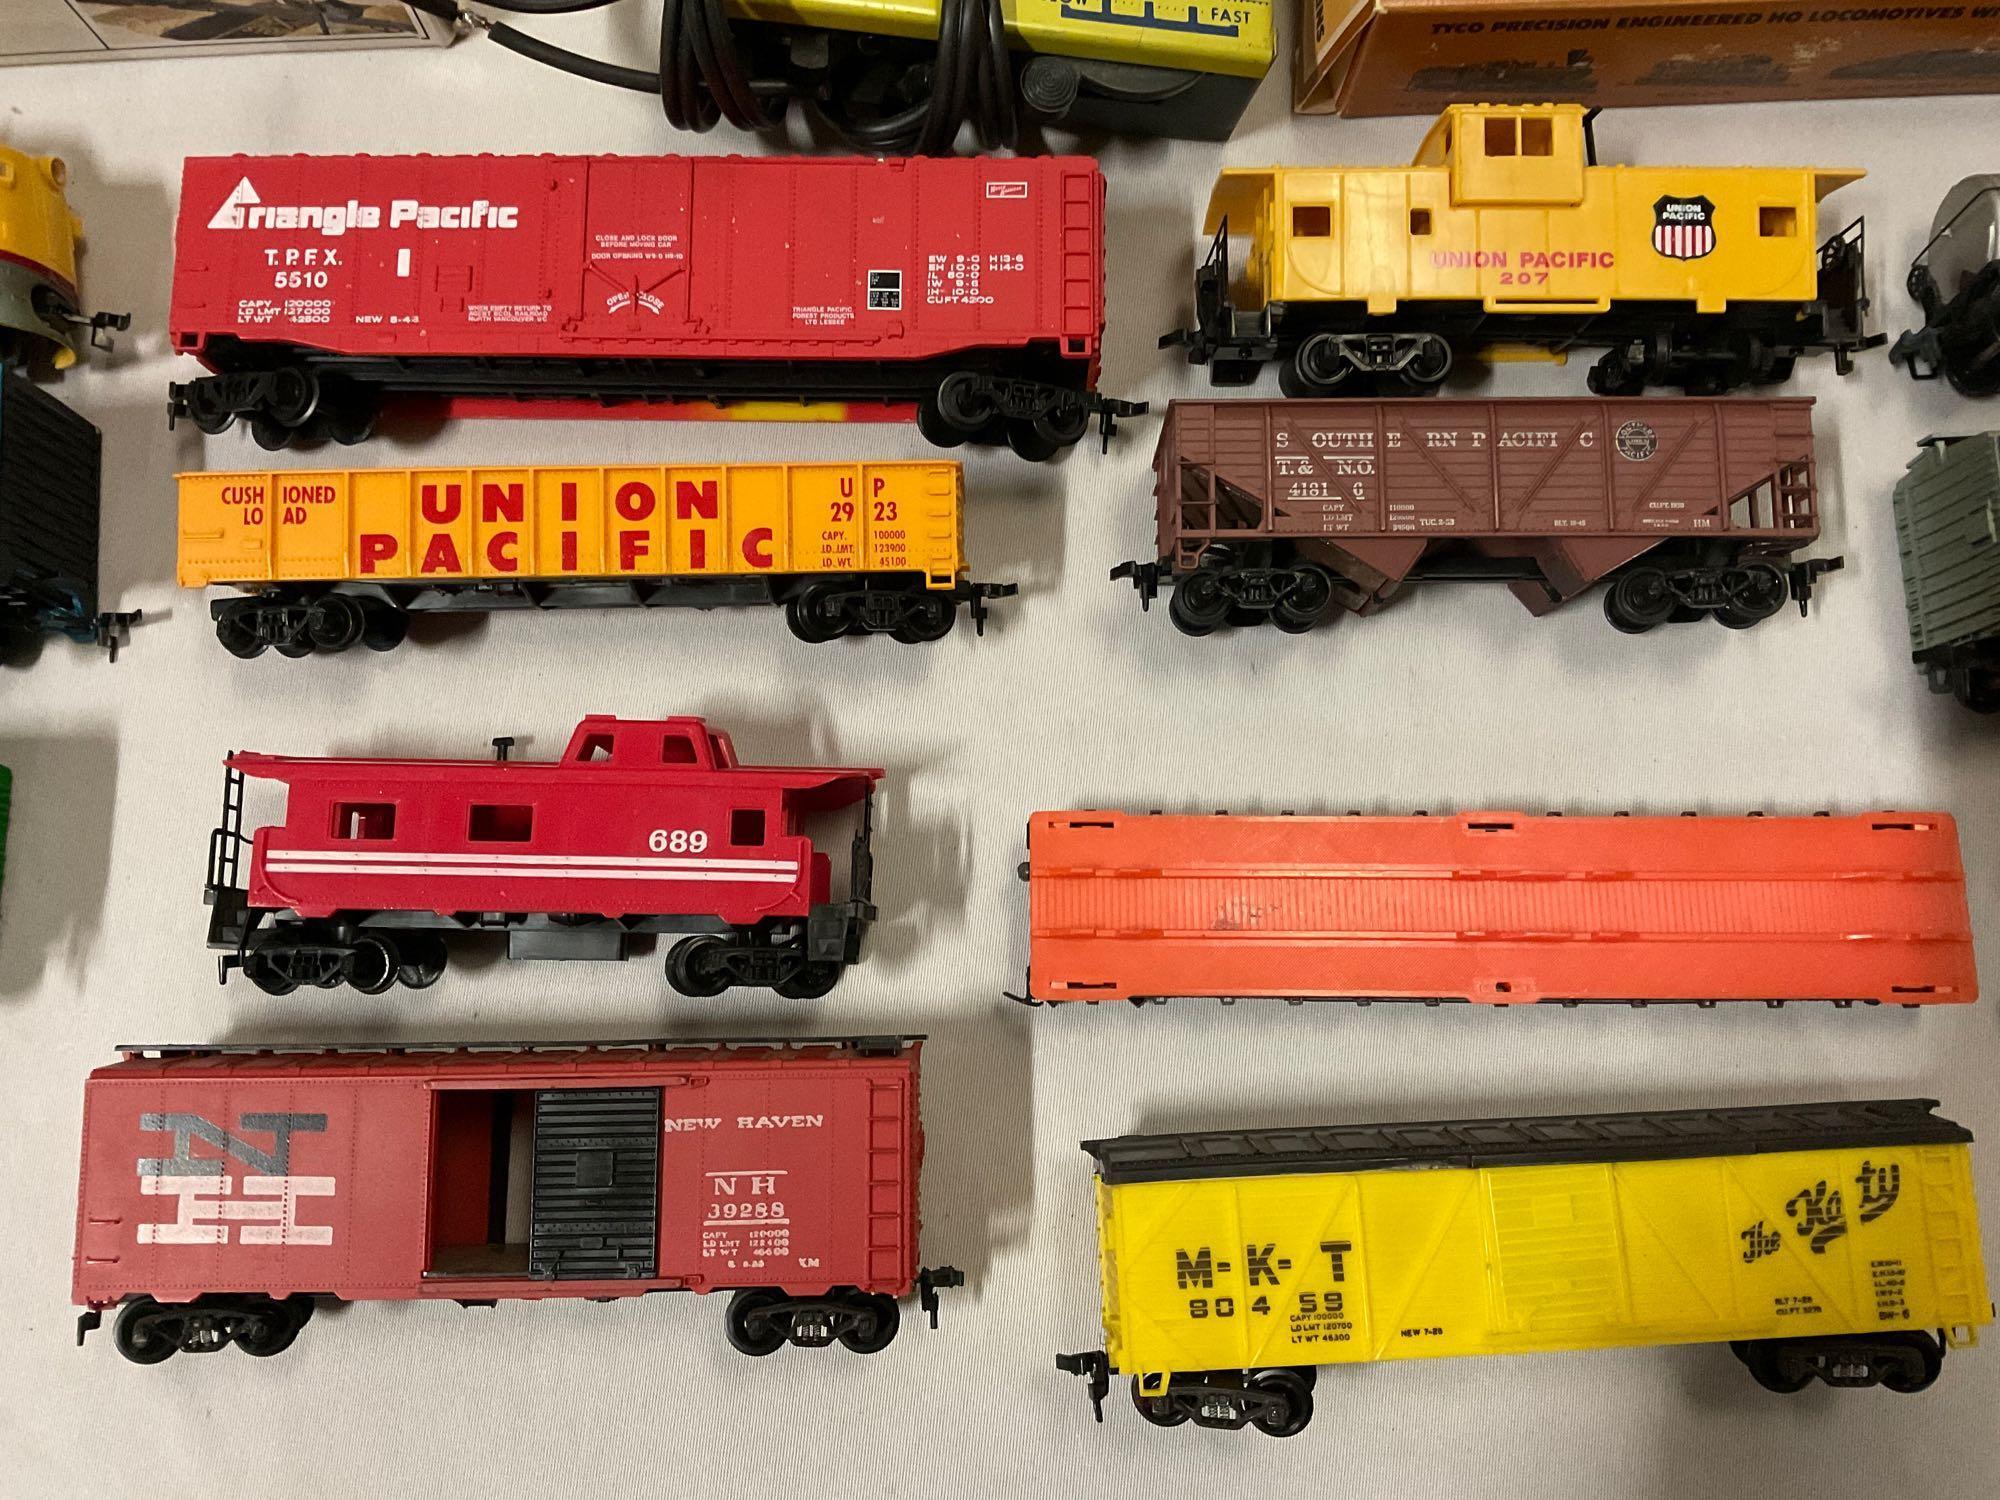 large HO SCALE locomotive train set w/ BACHMANN boxed sets, nice condition/ huge collection